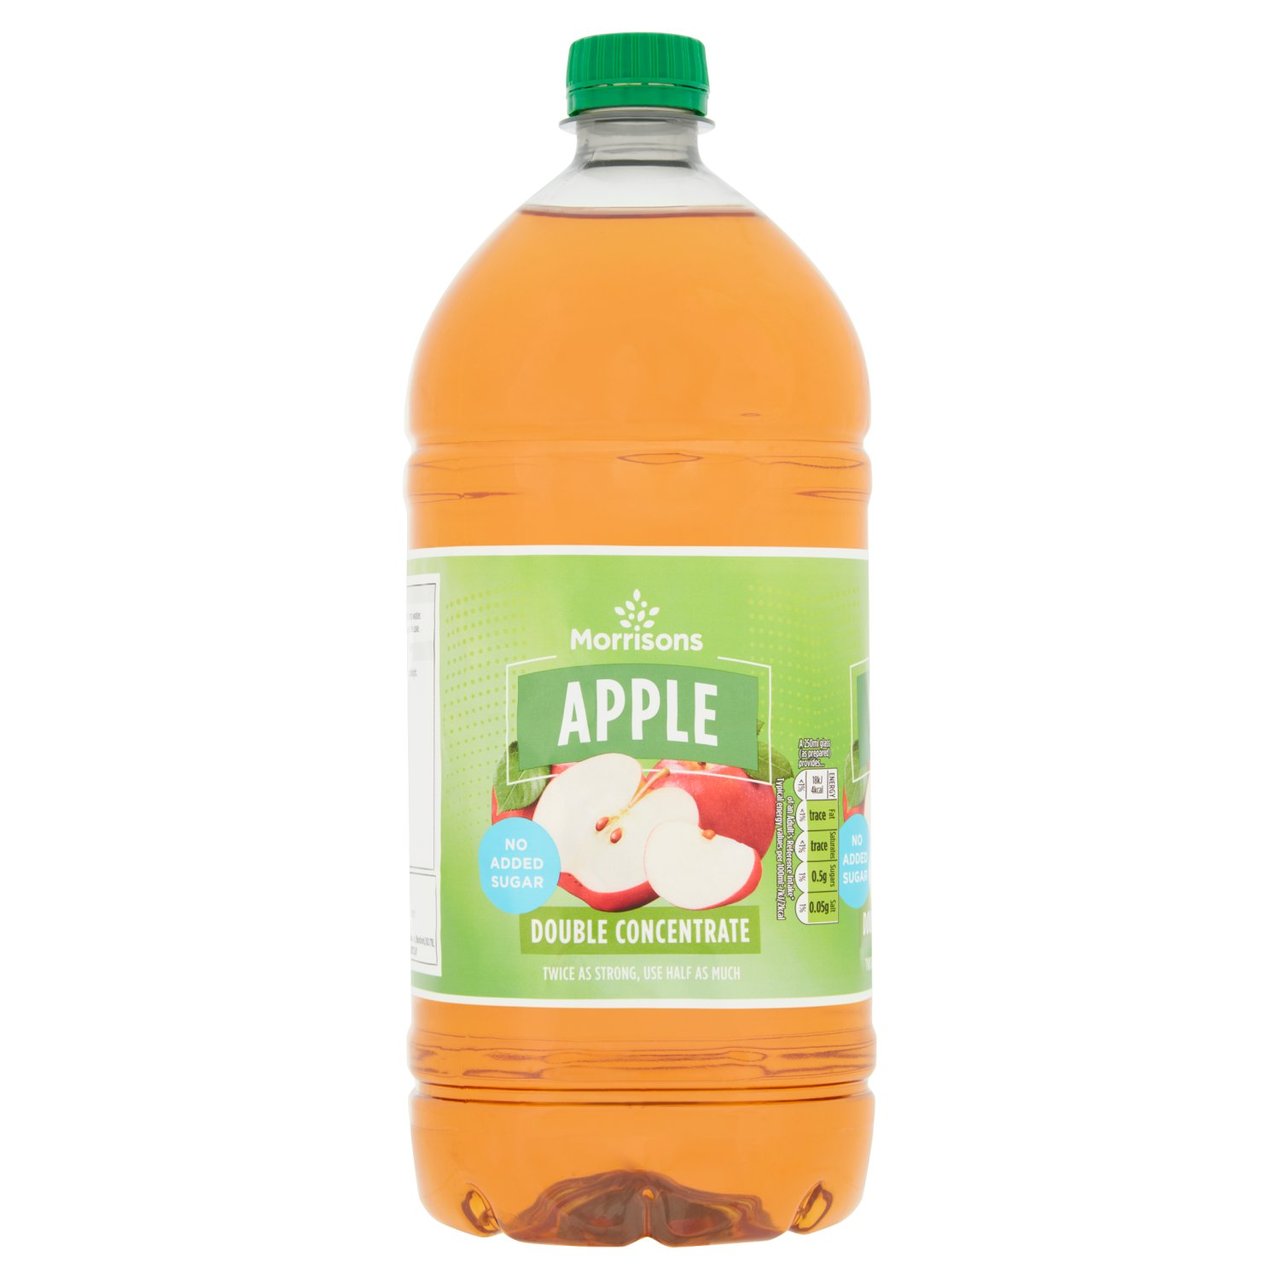 Morrisons No Added Sugar Apple Squash Double Concentrate 1.5L